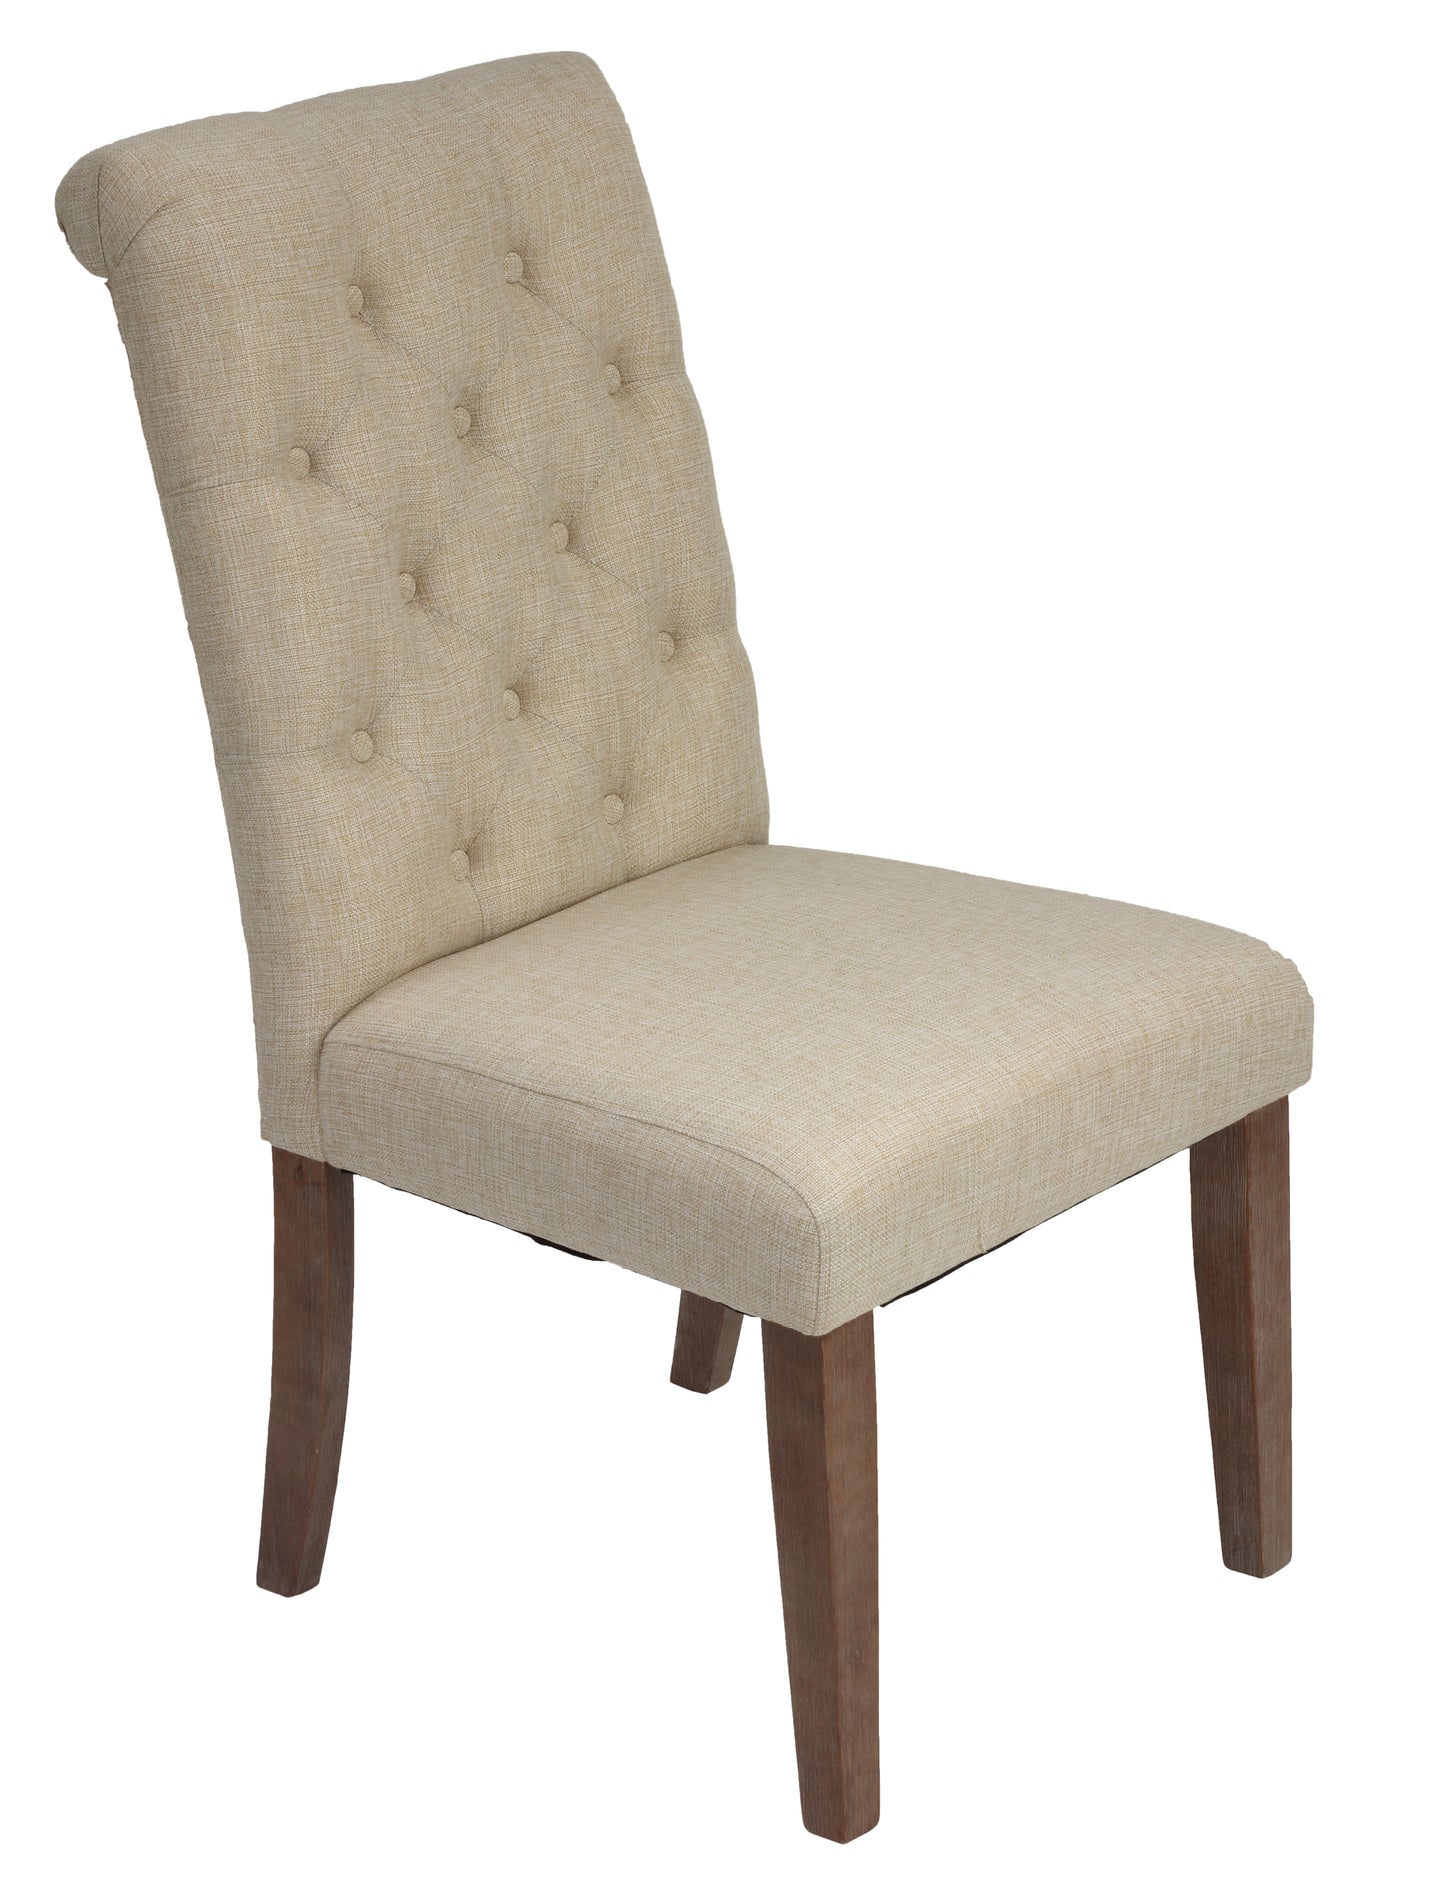 Cortesi Home Bradford Dining Chairs in a Soft Beige Linen with Tufted Back and , Set of 2